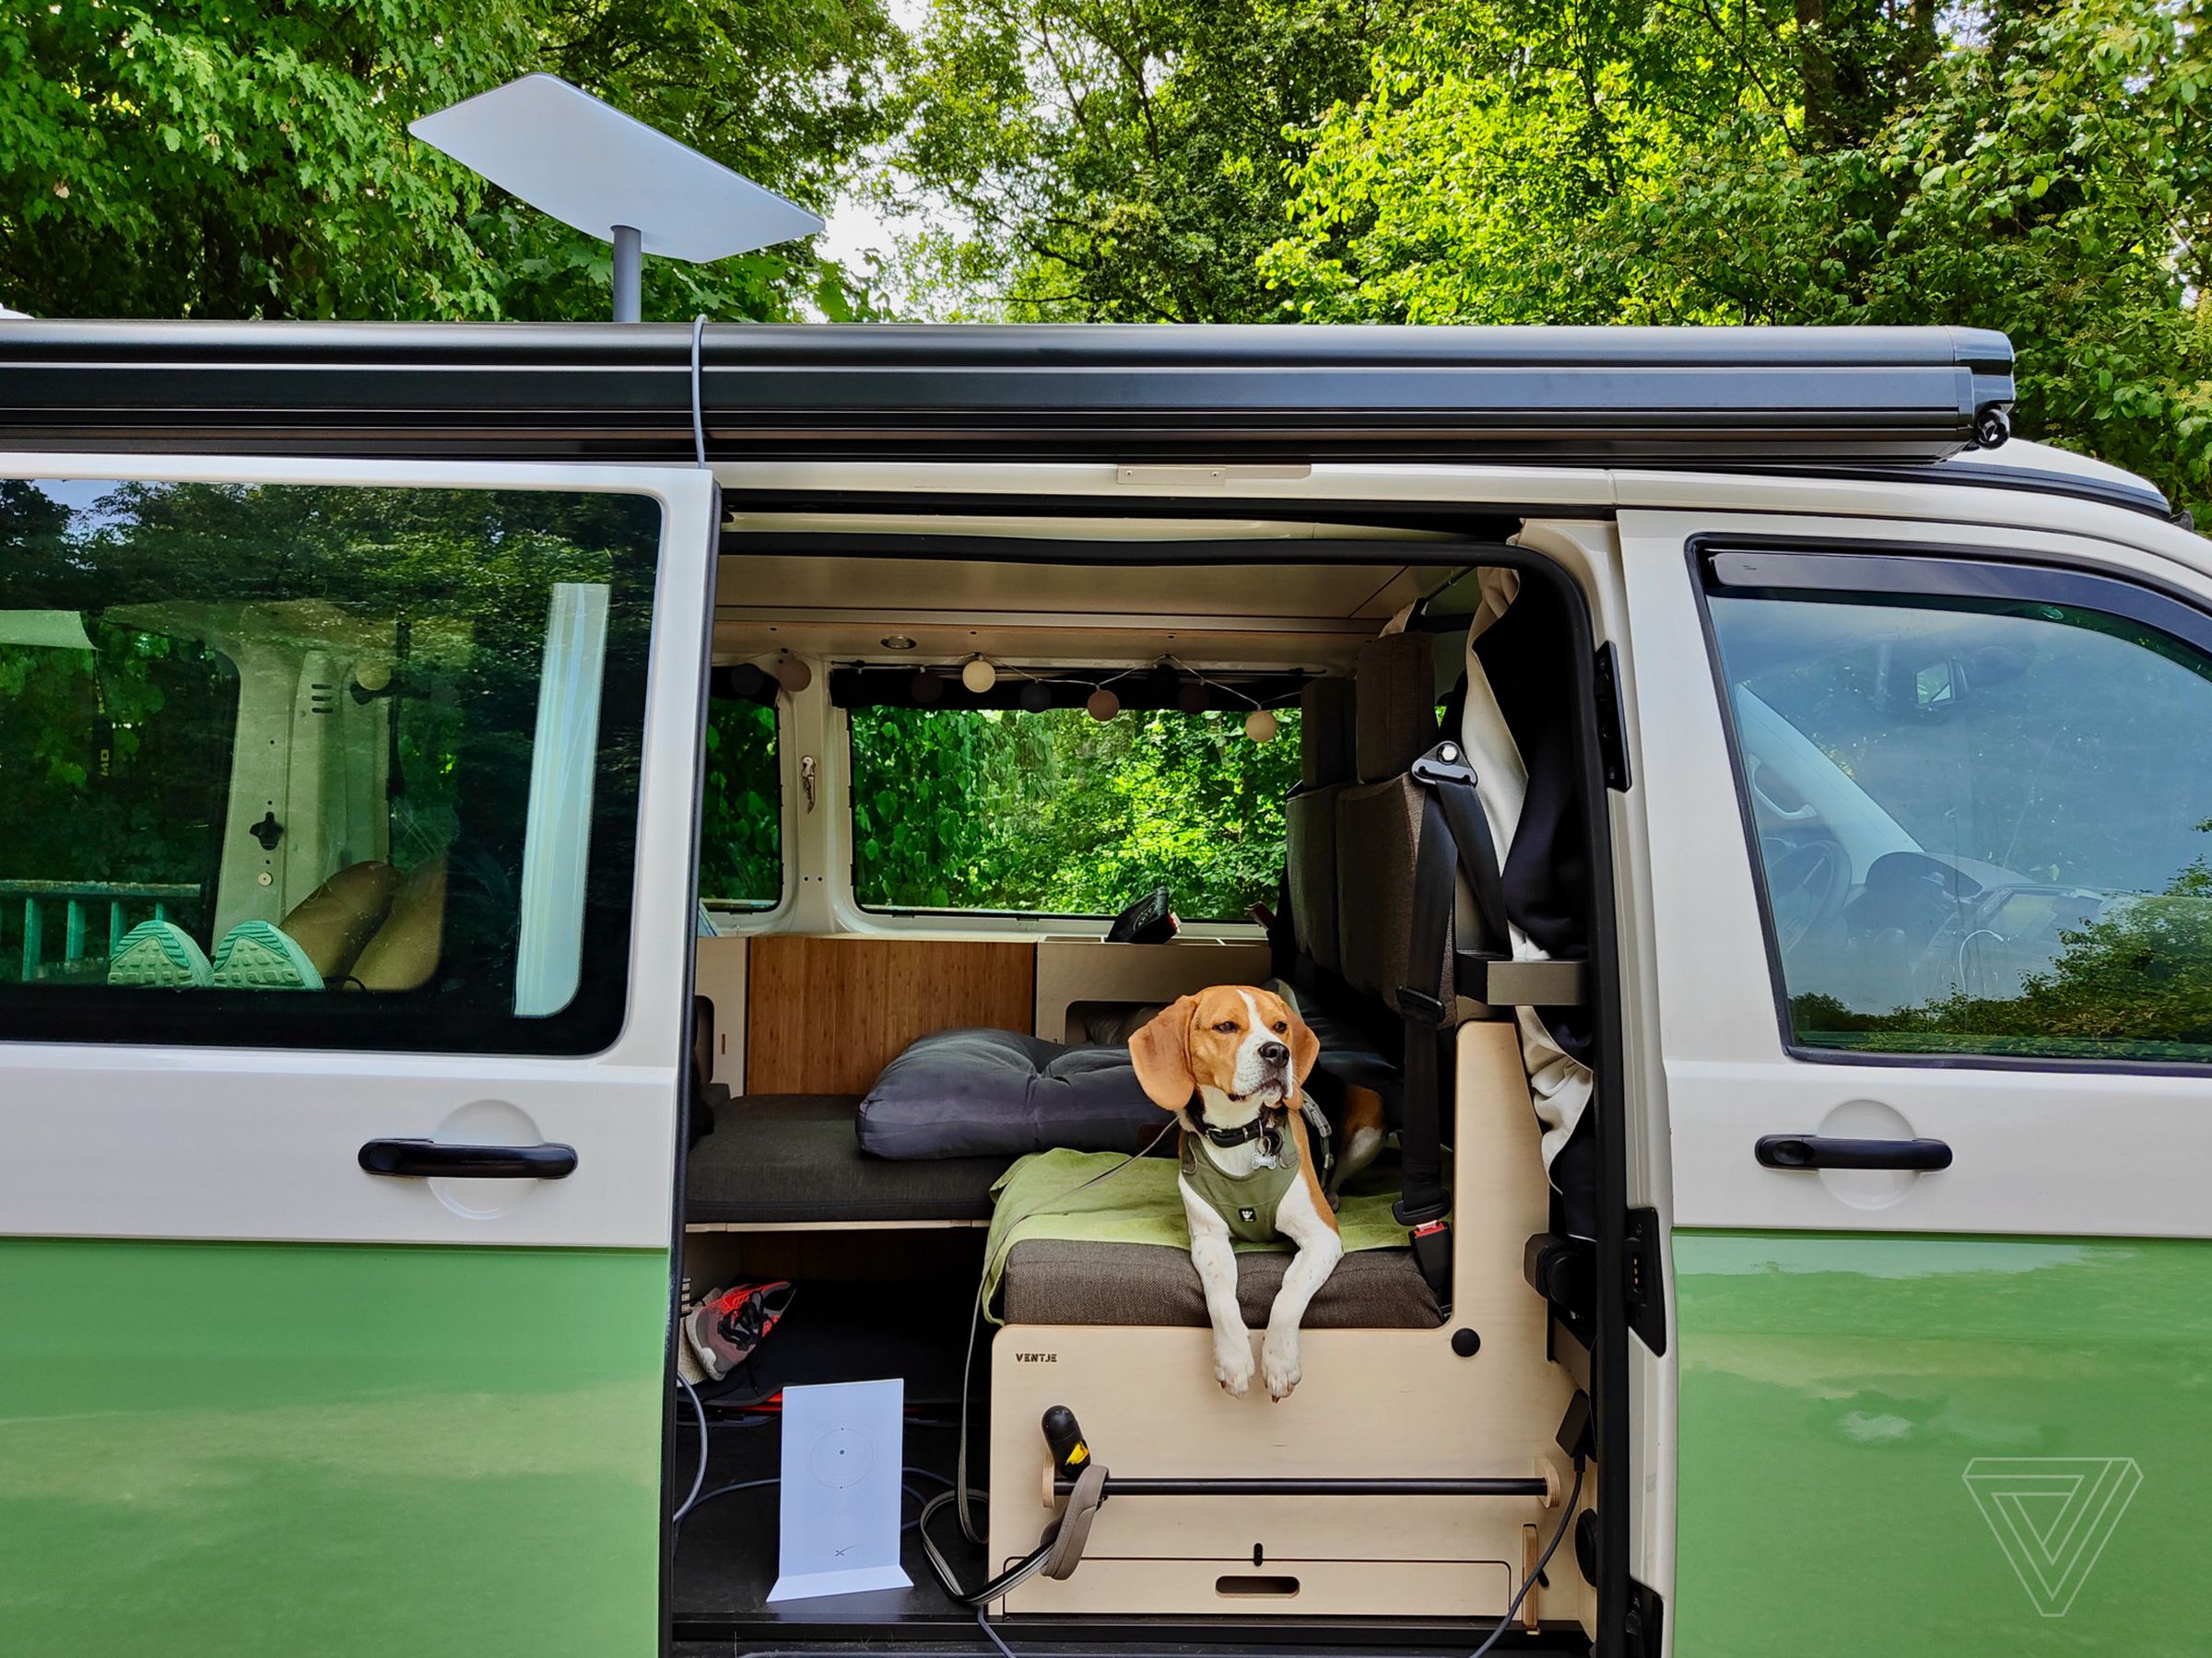 Hank sitting next to the Wi-Fi router as the Starlink RV dish connects through the trees.